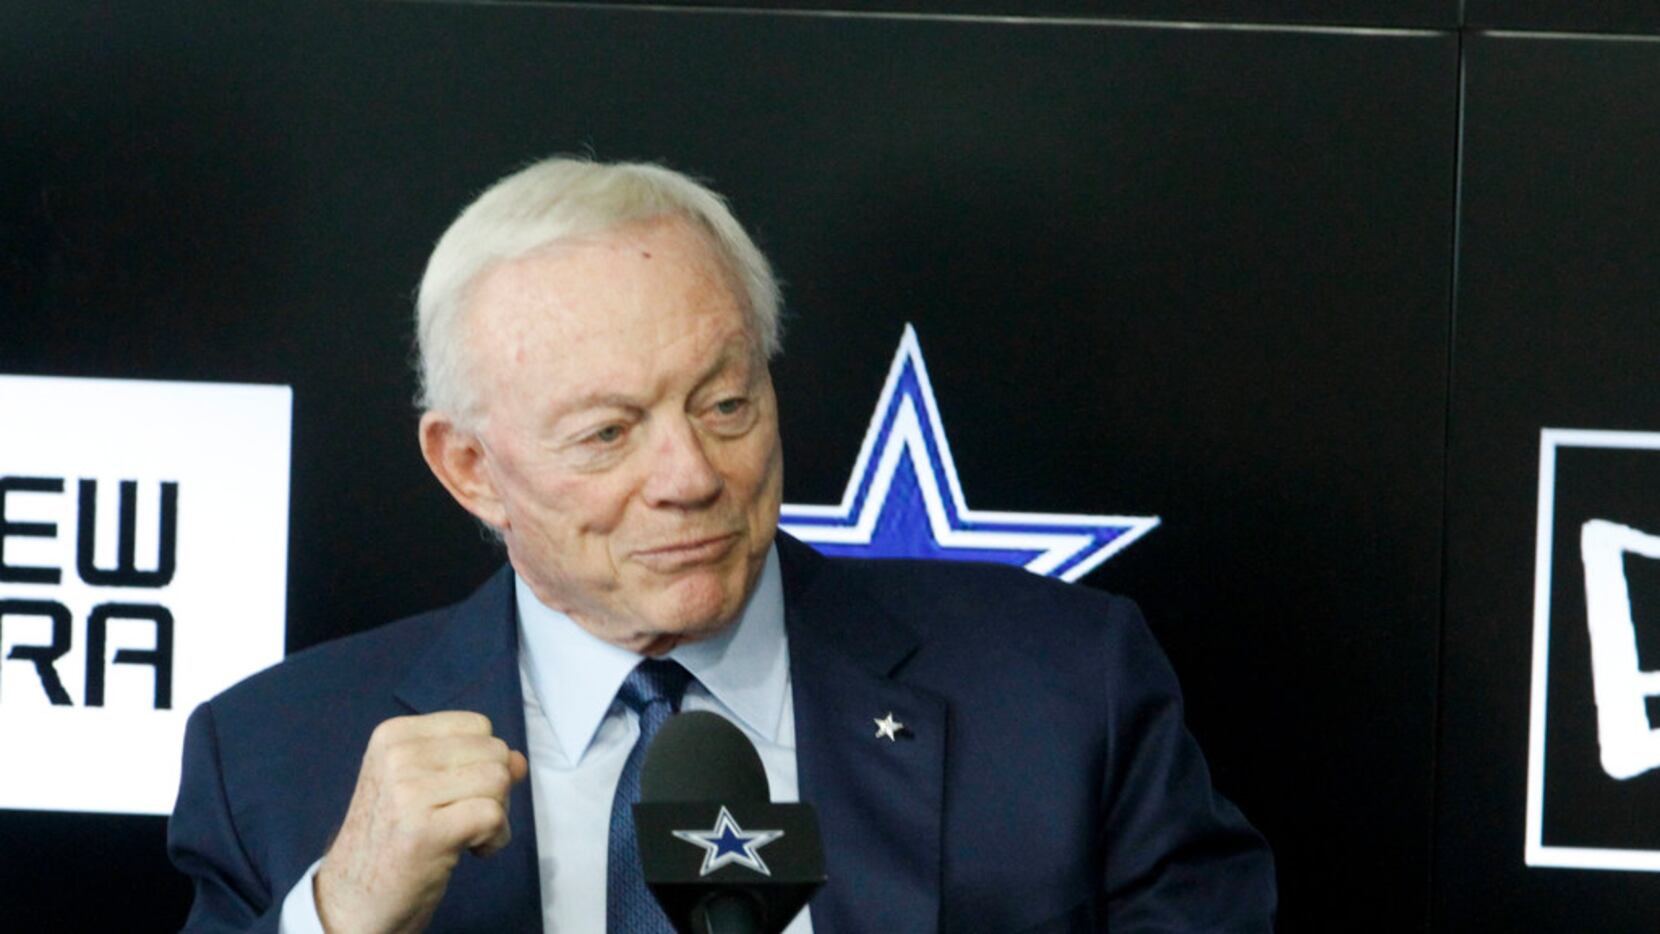 Cowboys retain title of NFL's most valuable team - Forbes